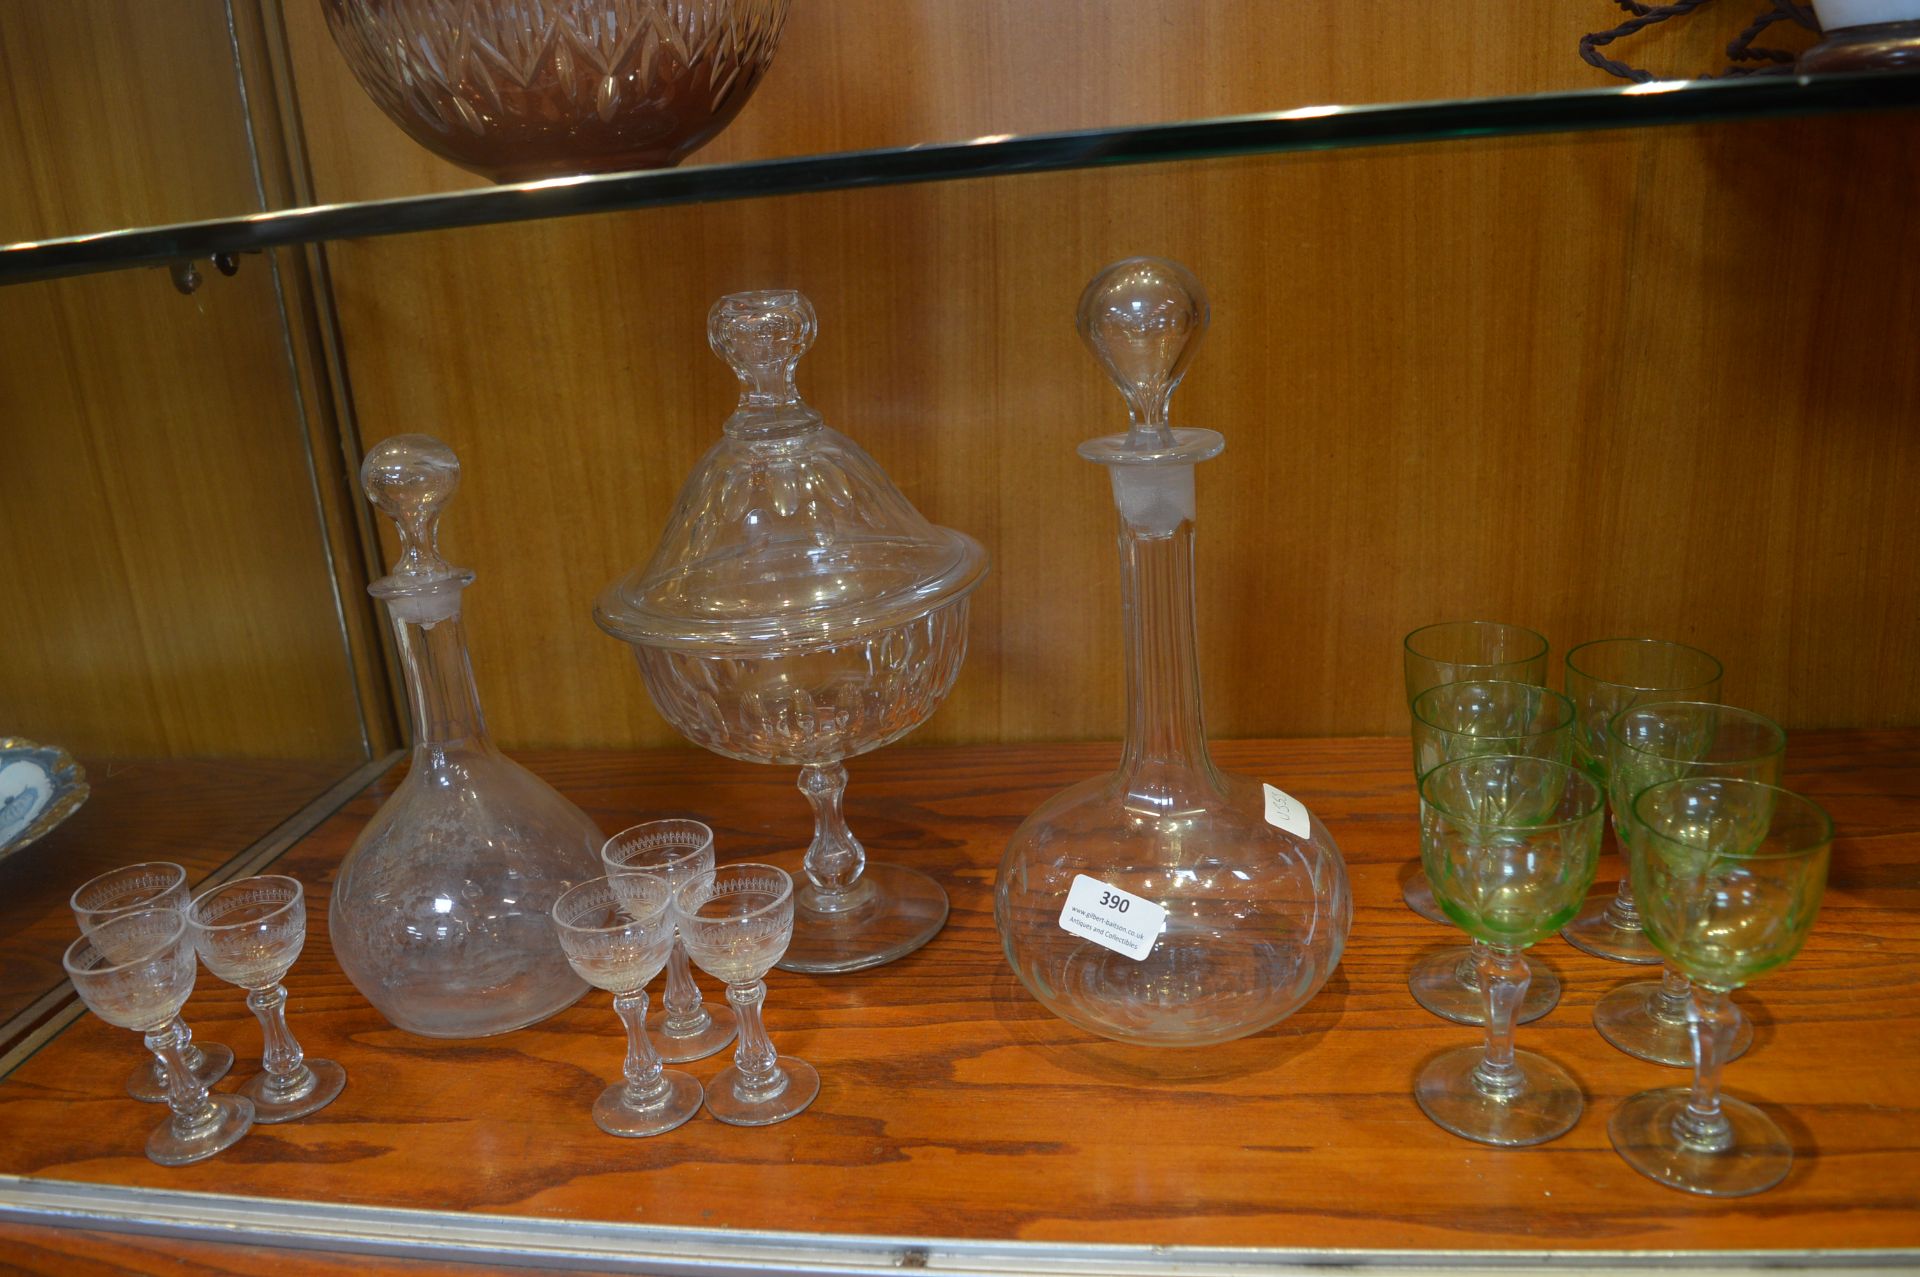 Glassware Including Decanters, Sherry Glass, Green Wine Glasses, etc.